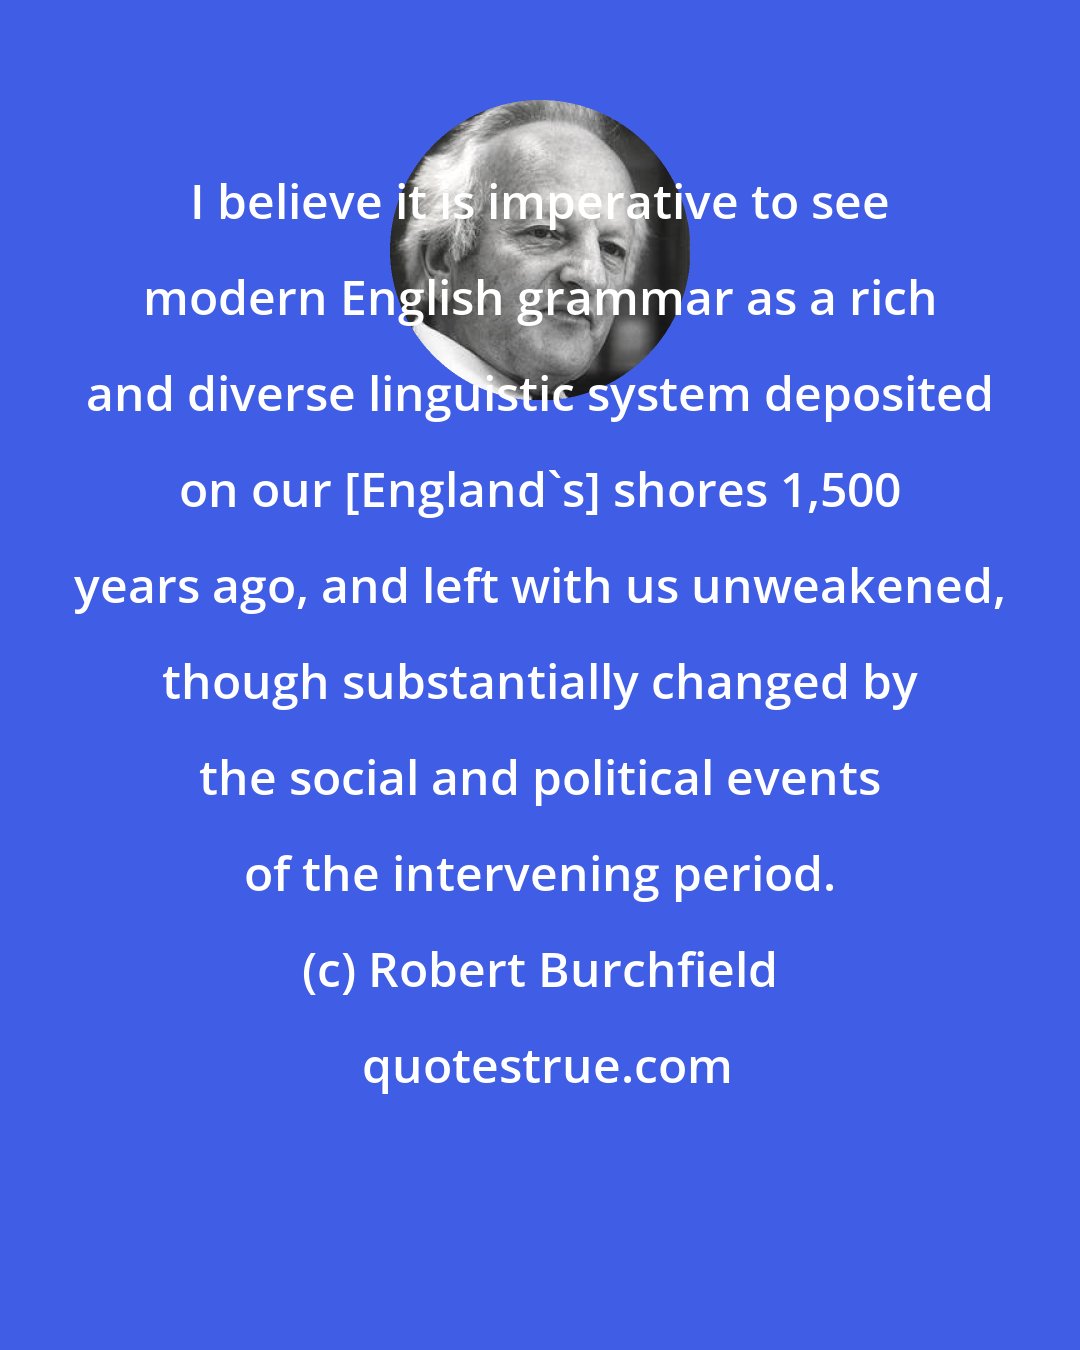 Robert Burchfield: I believe it is imperative to see modern English grammar as a rich and diverse linguistic system deposited on our [England's] shores 1,500 years ago, and left with us unweakened, though substantially changed by the social and political events of the intervening period.